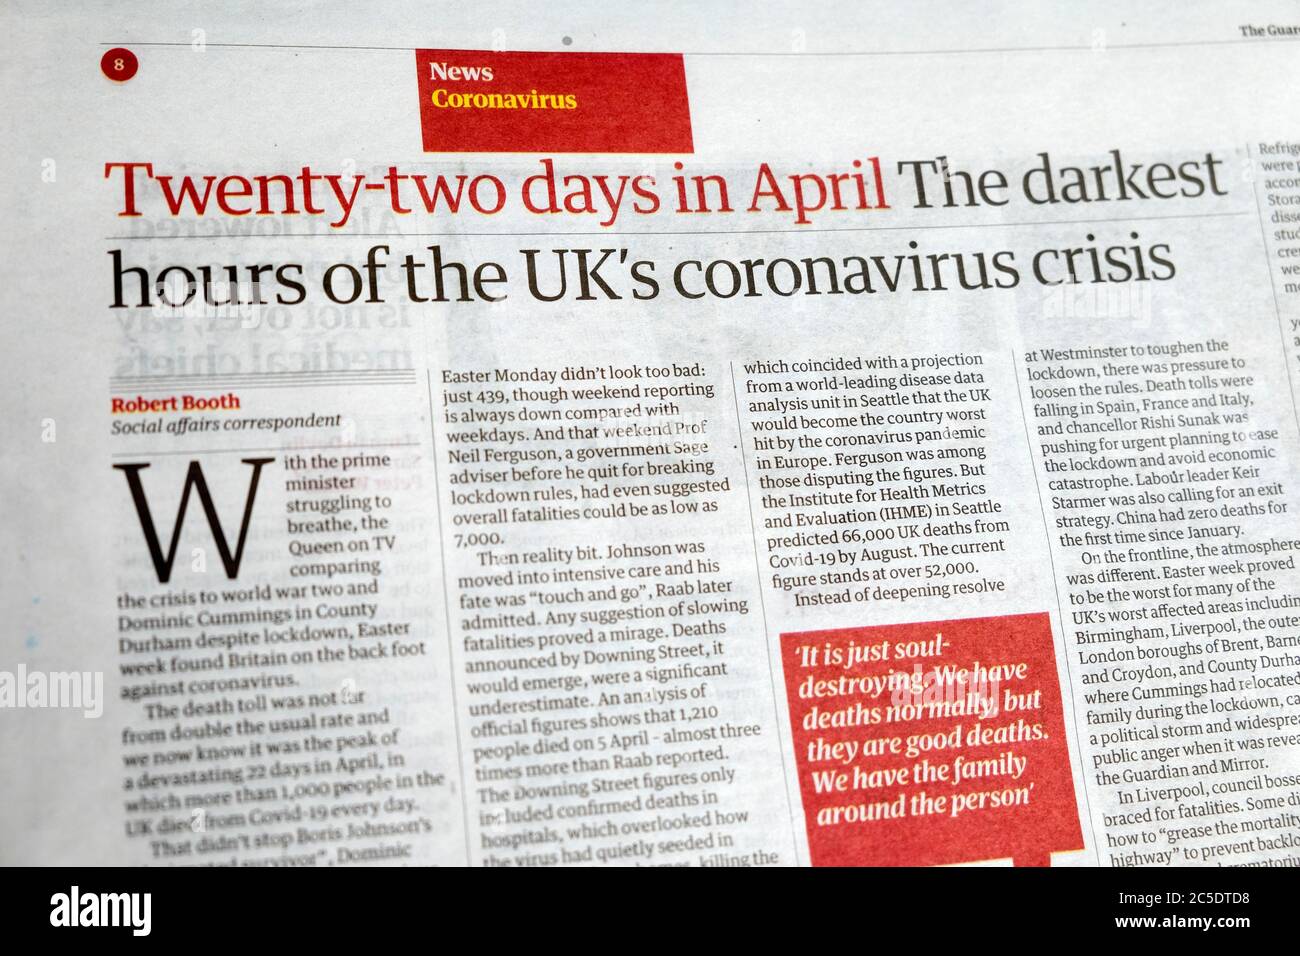 ' 'Twenty-two days in April' The darkest hours of the UK's coronavirus crisis' news article inside page Guardian newspaper 20 June 2020 UK Stock Photo